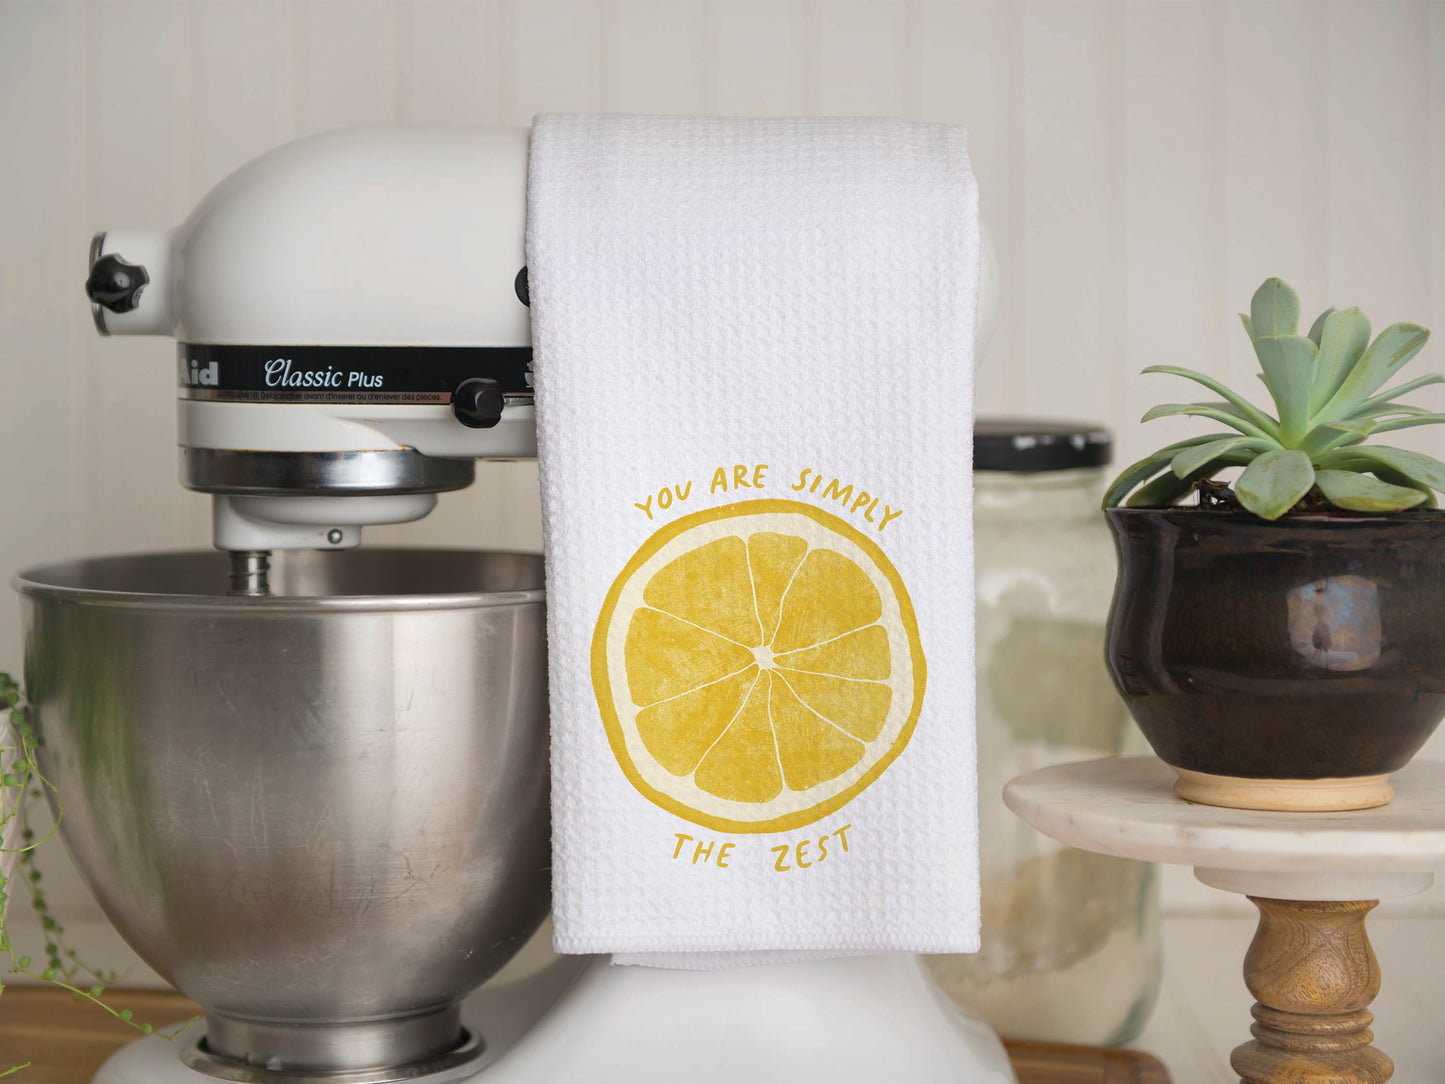 You Are Simply the Zest Waffle Weave Kitchen Towel